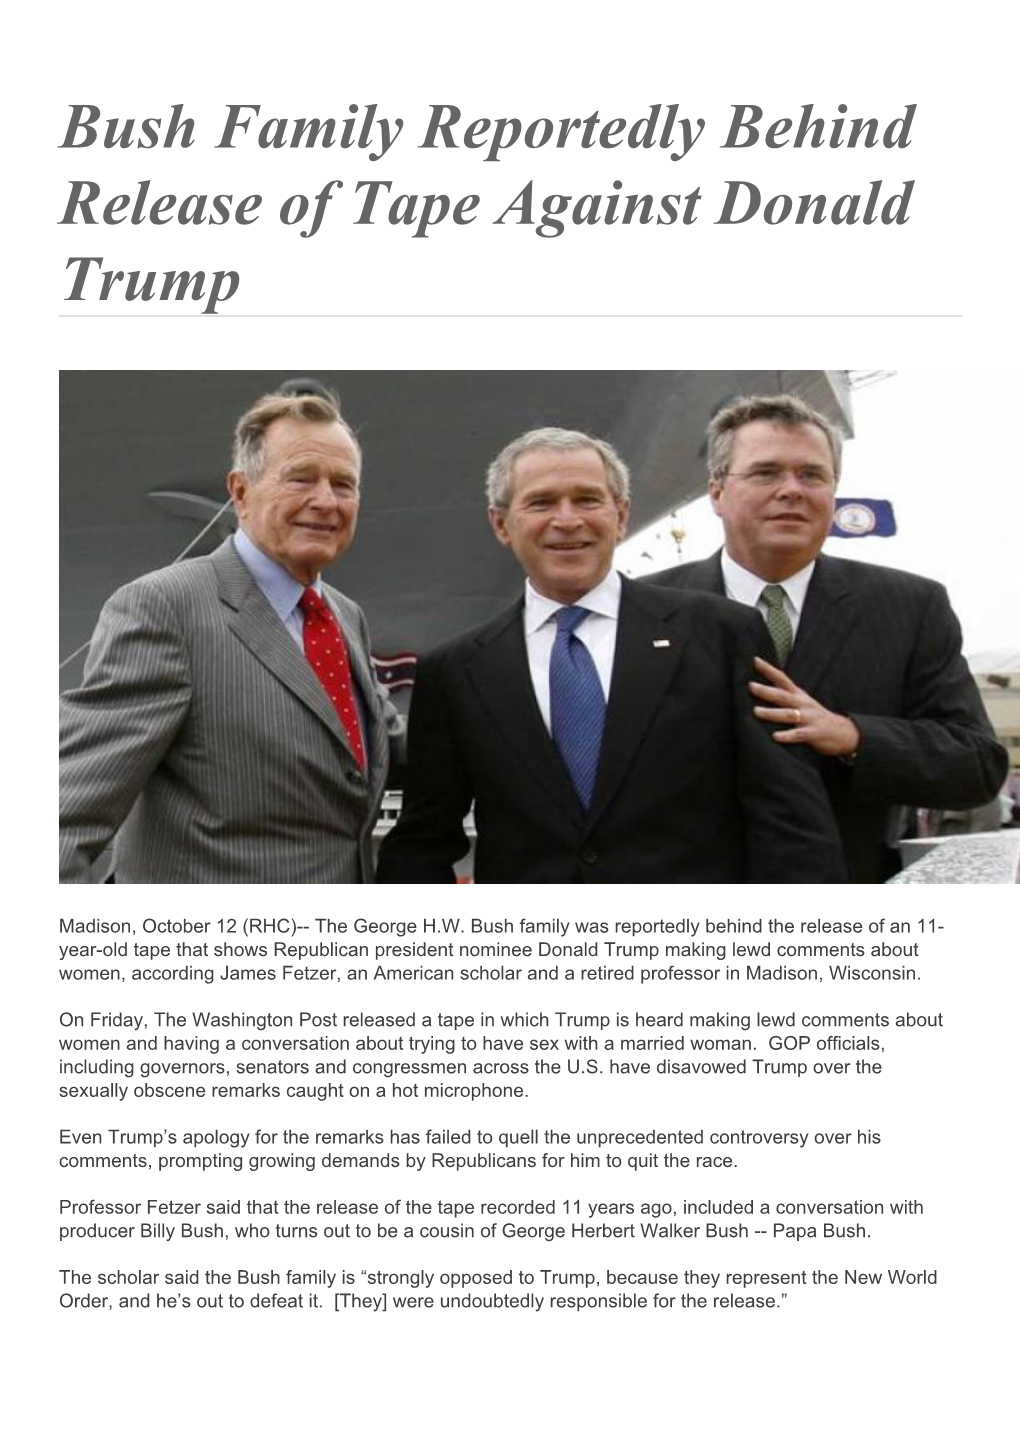 Bush Family Reportedly Behind Release of Tape Against Donald Trump